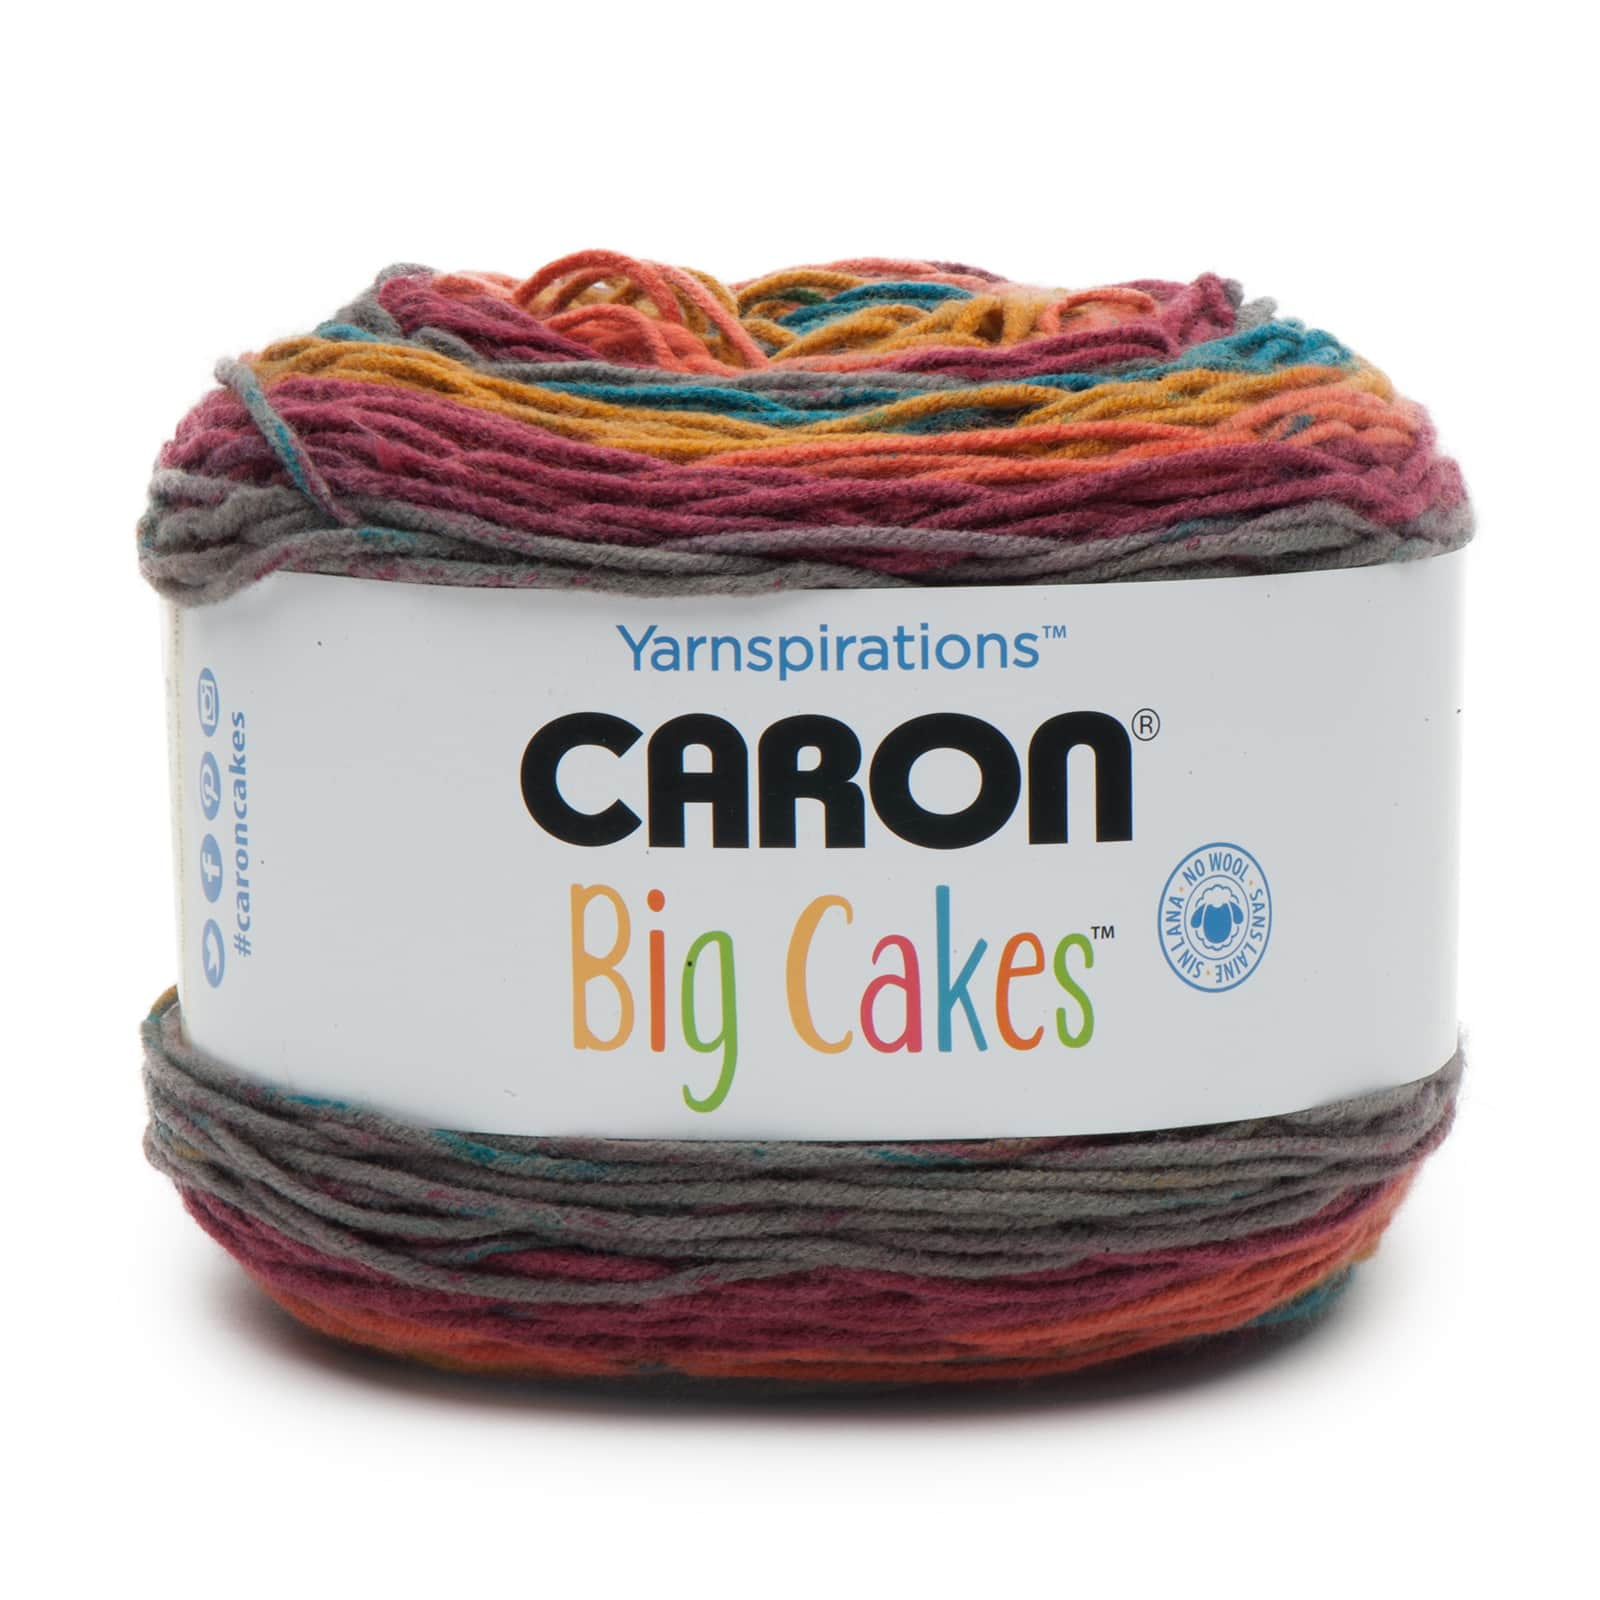 Caron Cakes ~ A Yarn Review - Crystalized Designs